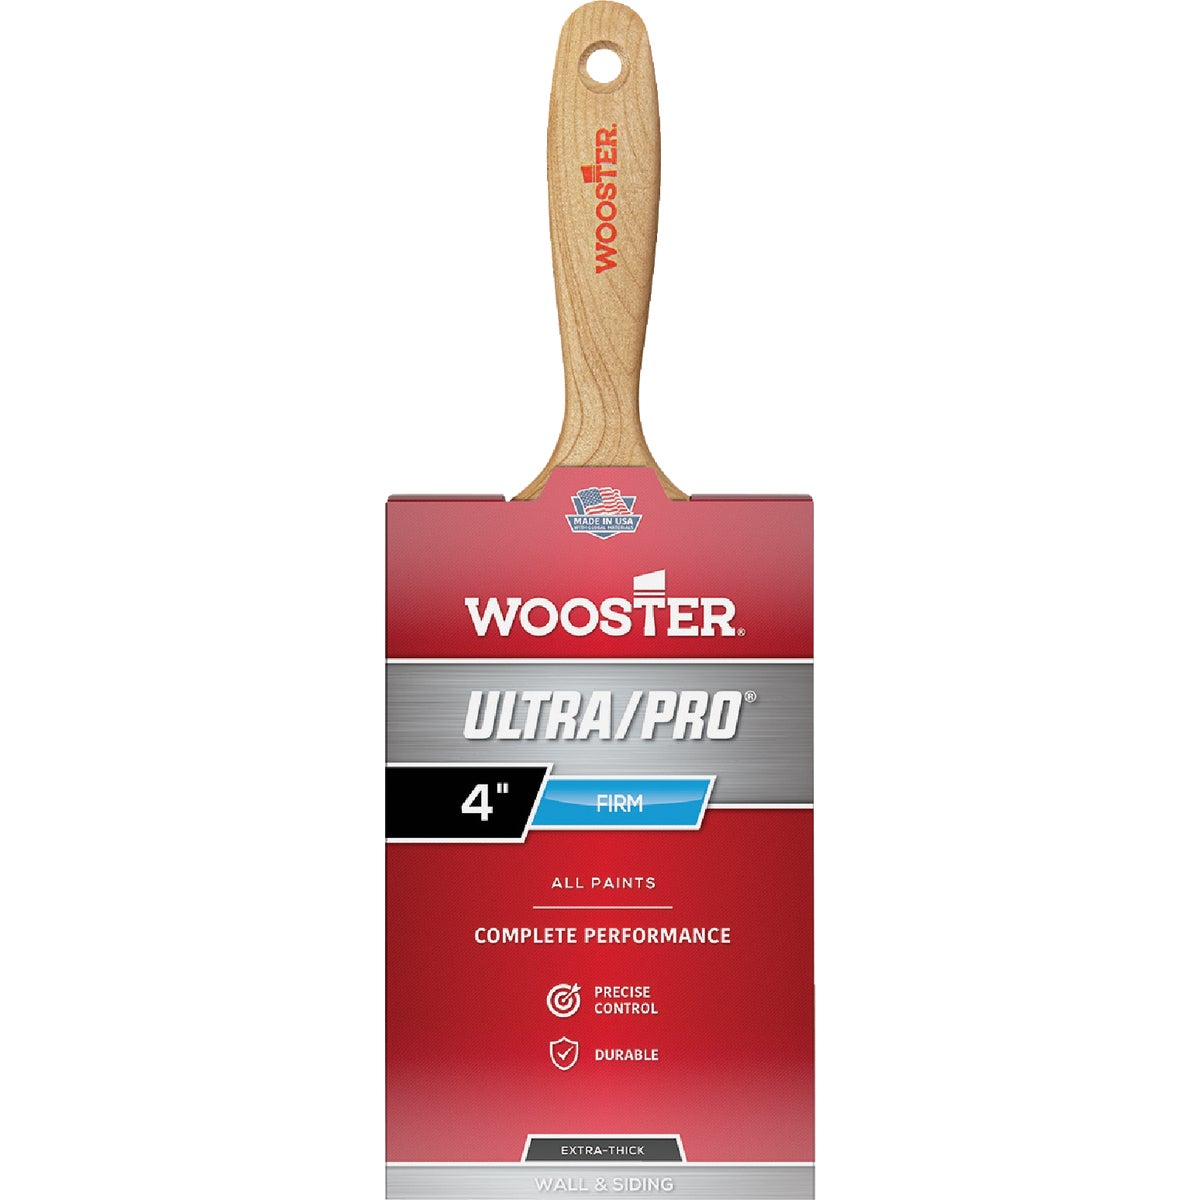 Wooster Ultra/Pro Firm 4 In. Flat Wall Paint Brush